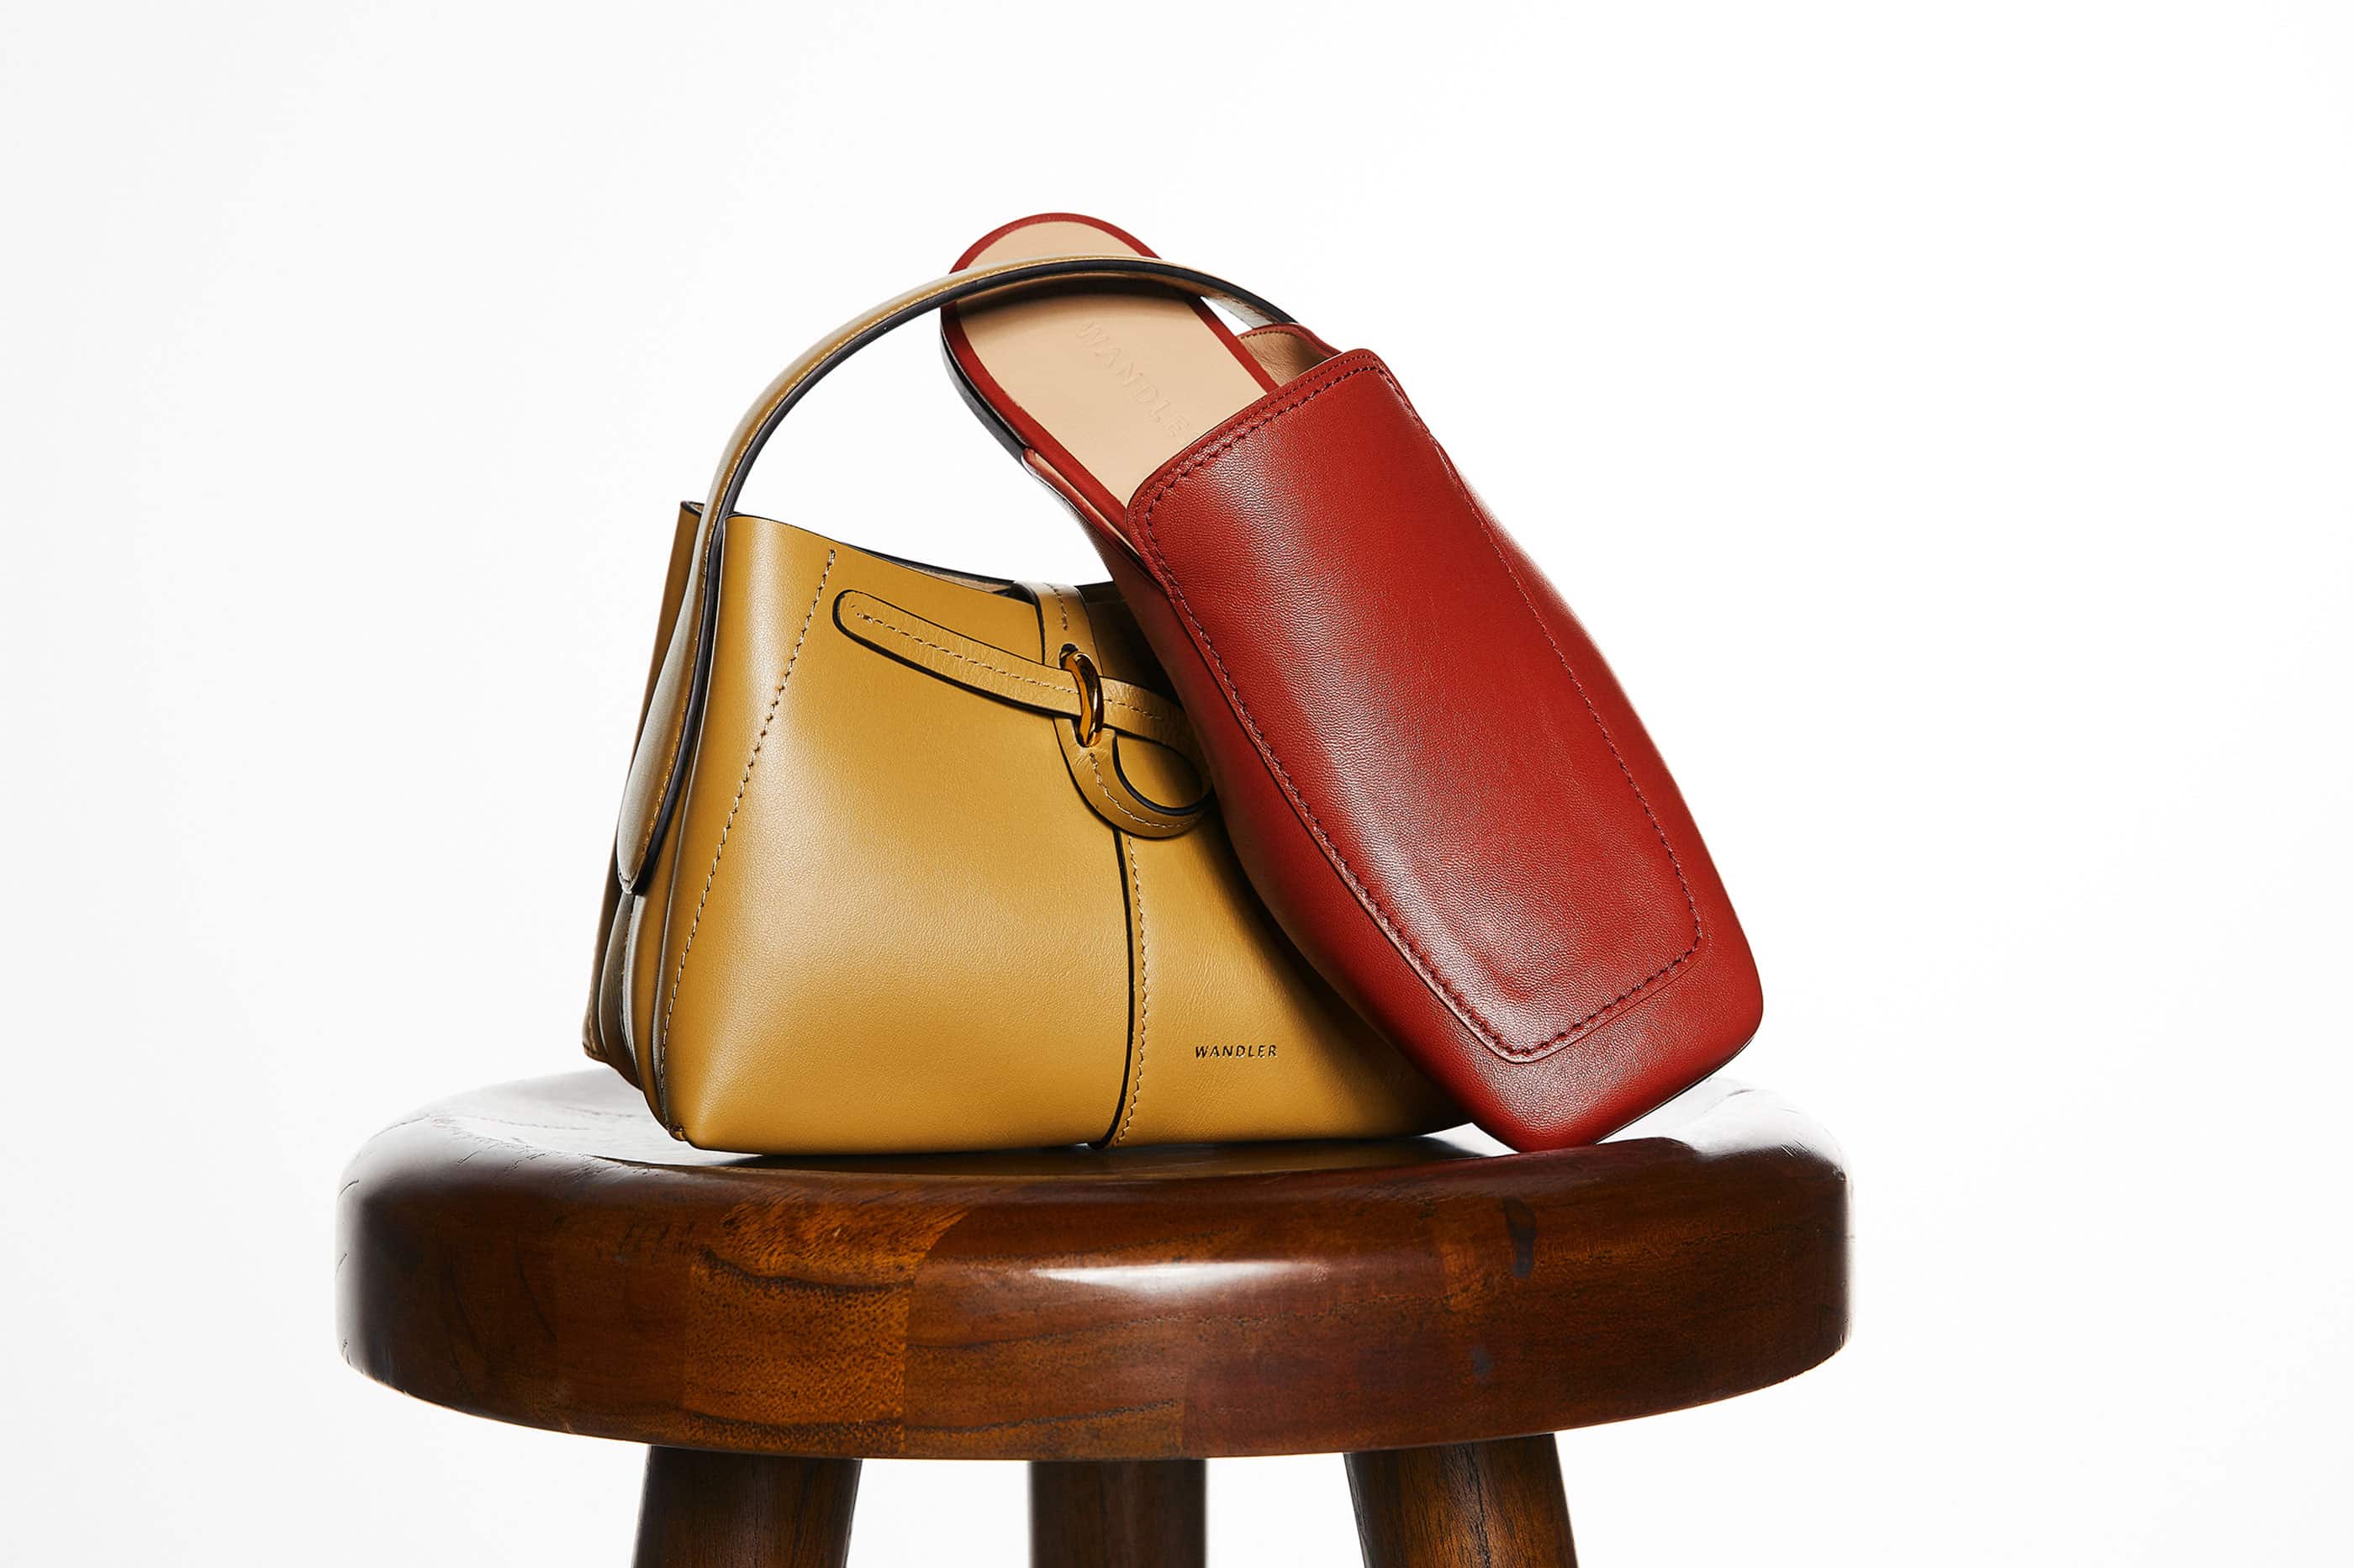 THE OUTNET announce exclusive up-cycled capsule with leather goods brand Wandler